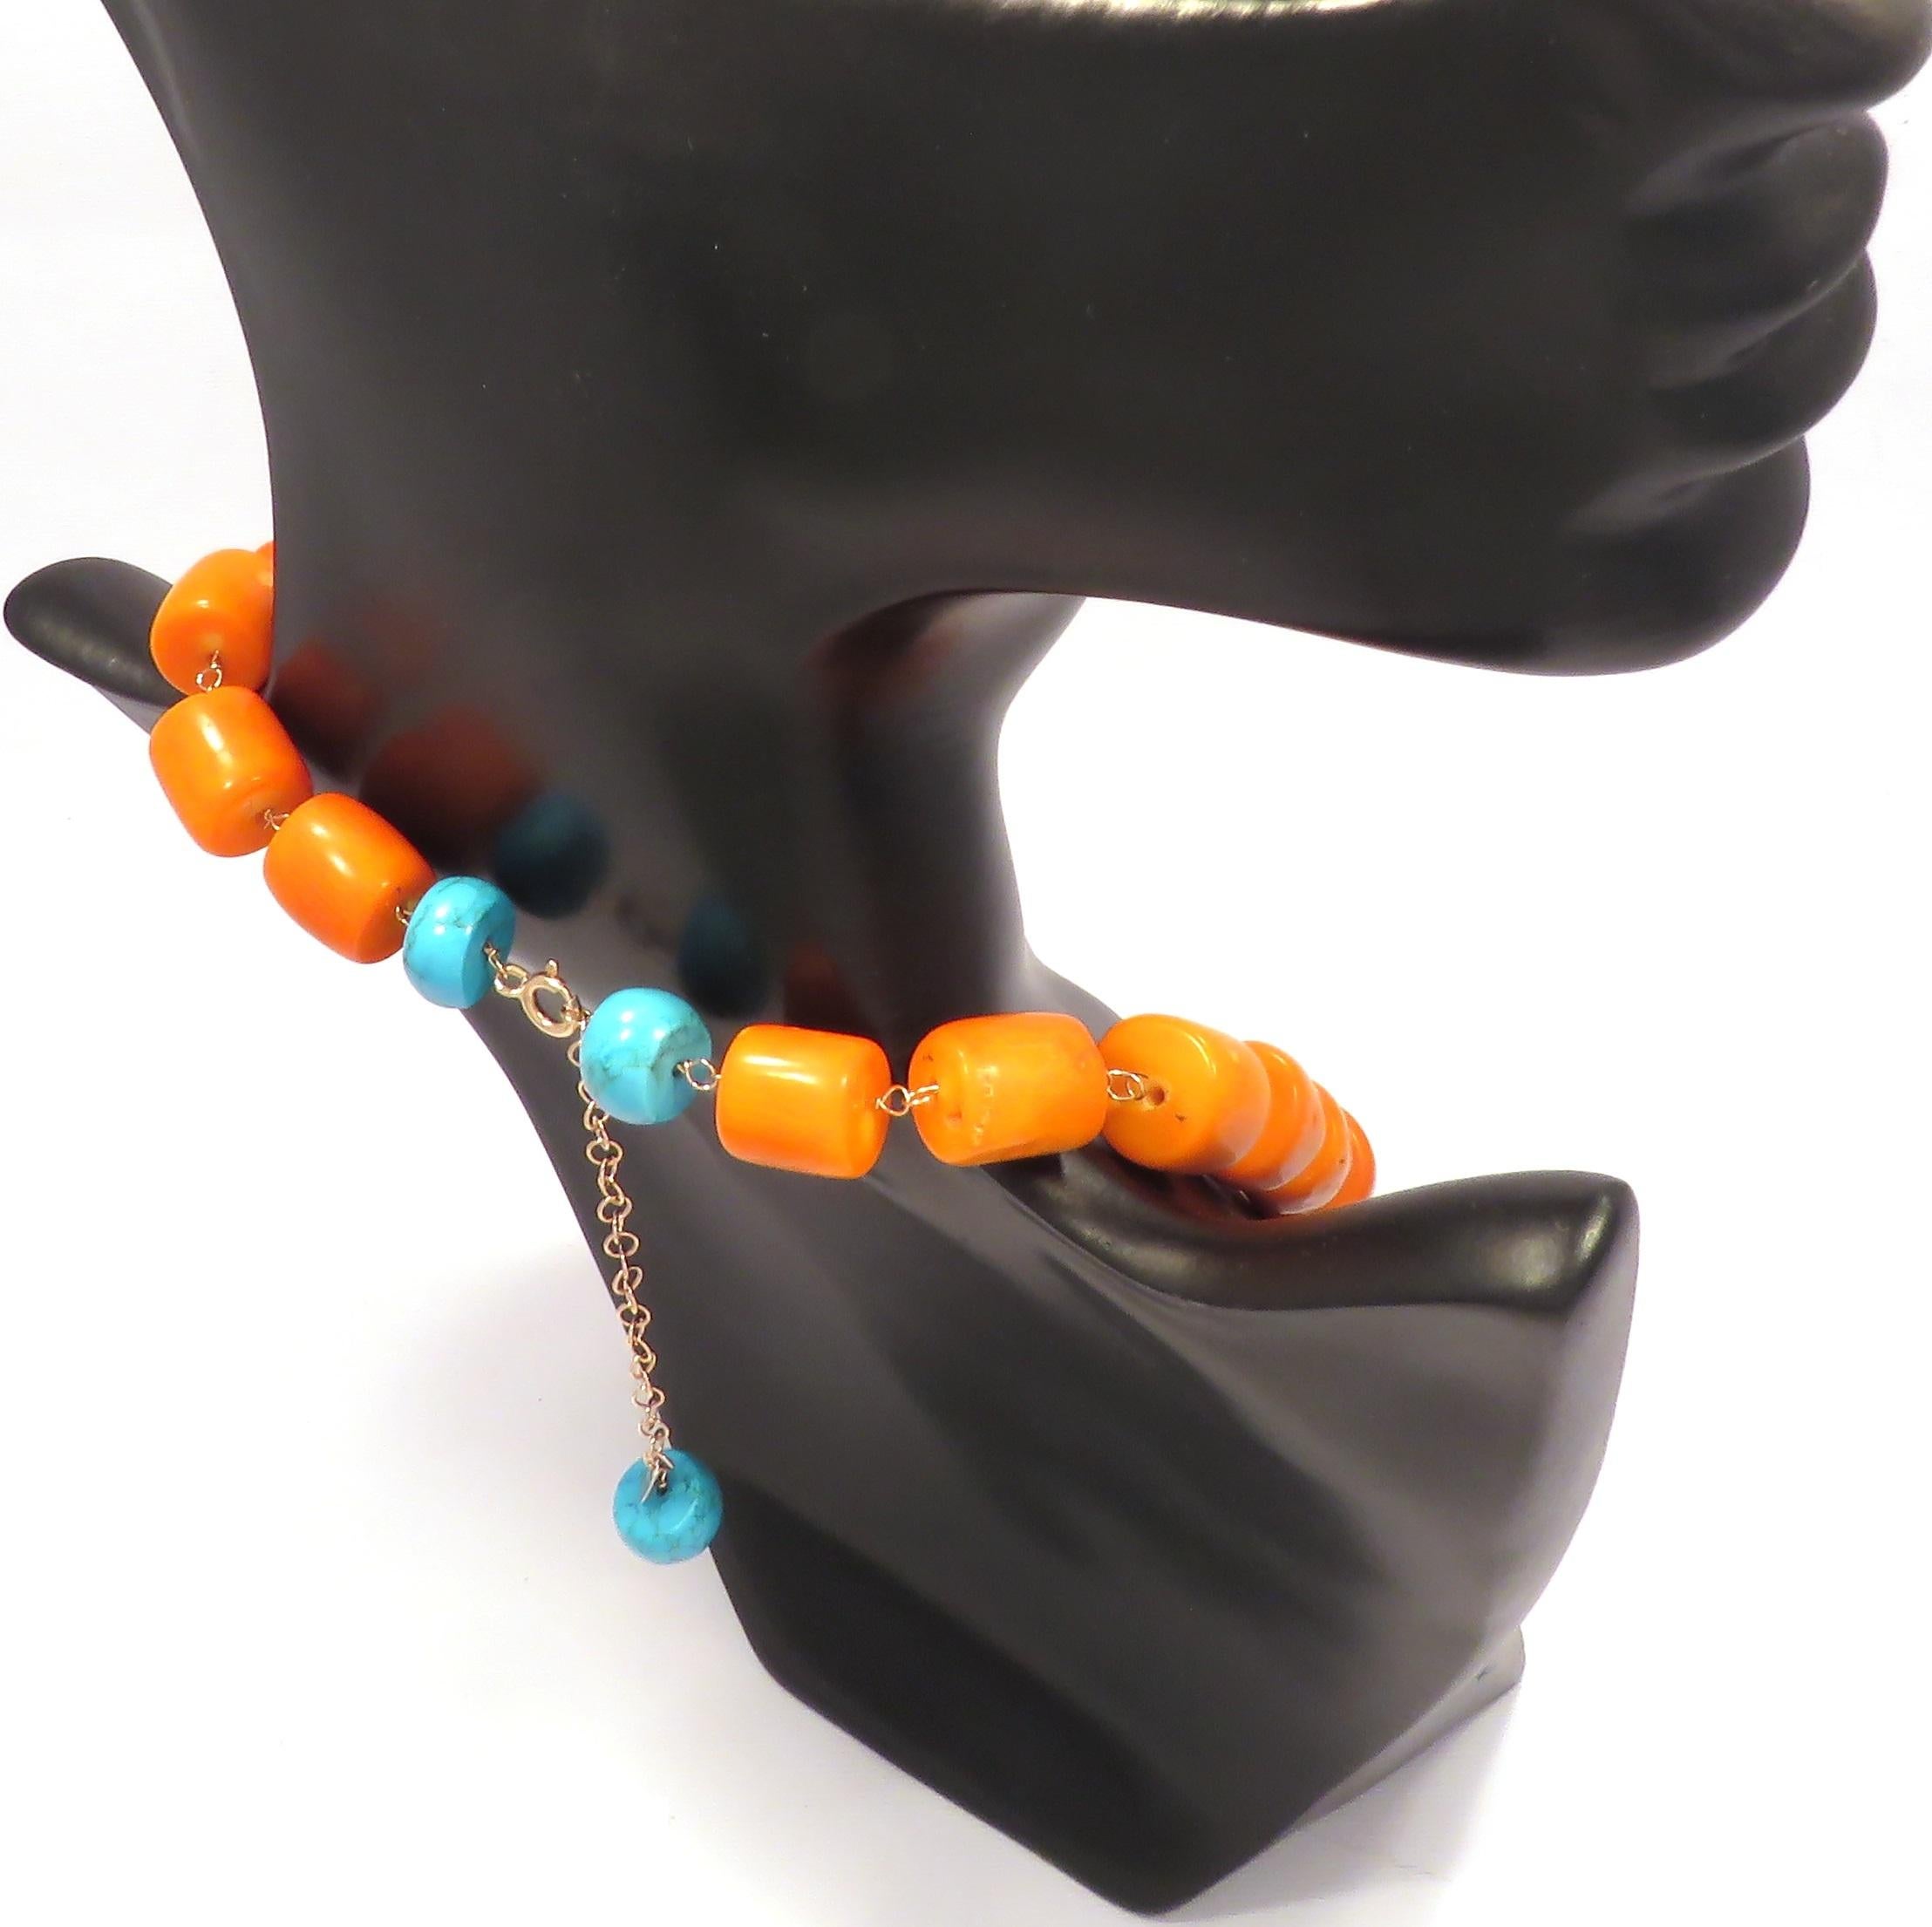 Ball Cut Vivid Orange Stones Turquoise 9 Karat Rose Gold Necklace Handcrafted in Italy